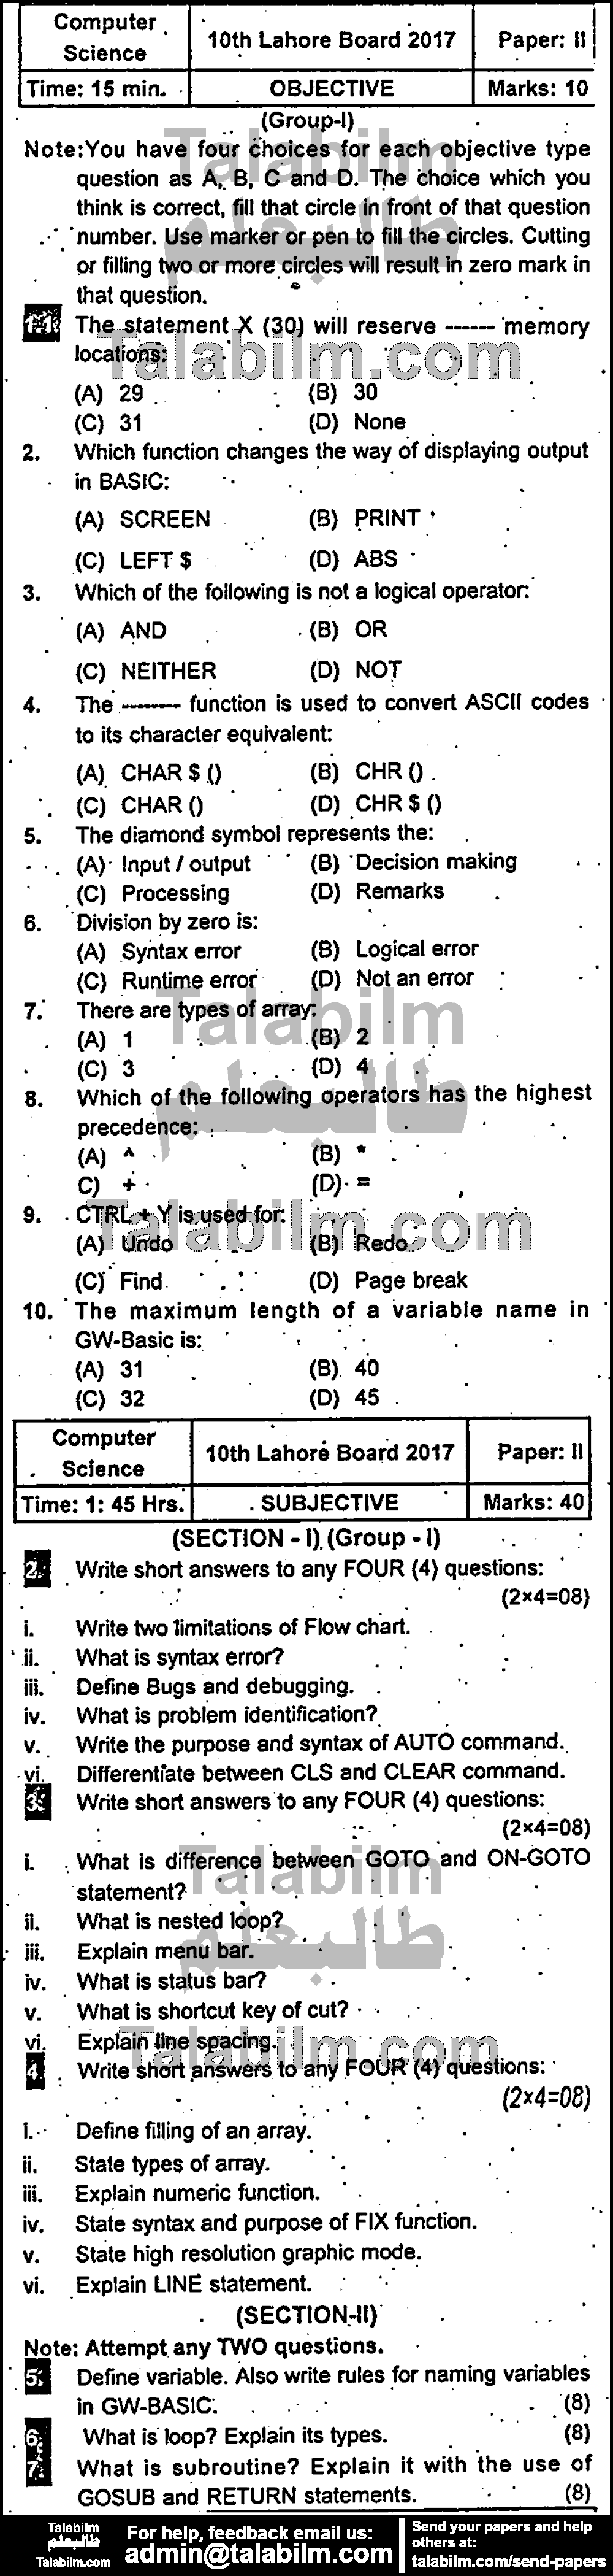 Computer Science 0 past paper for 2017 Group-I